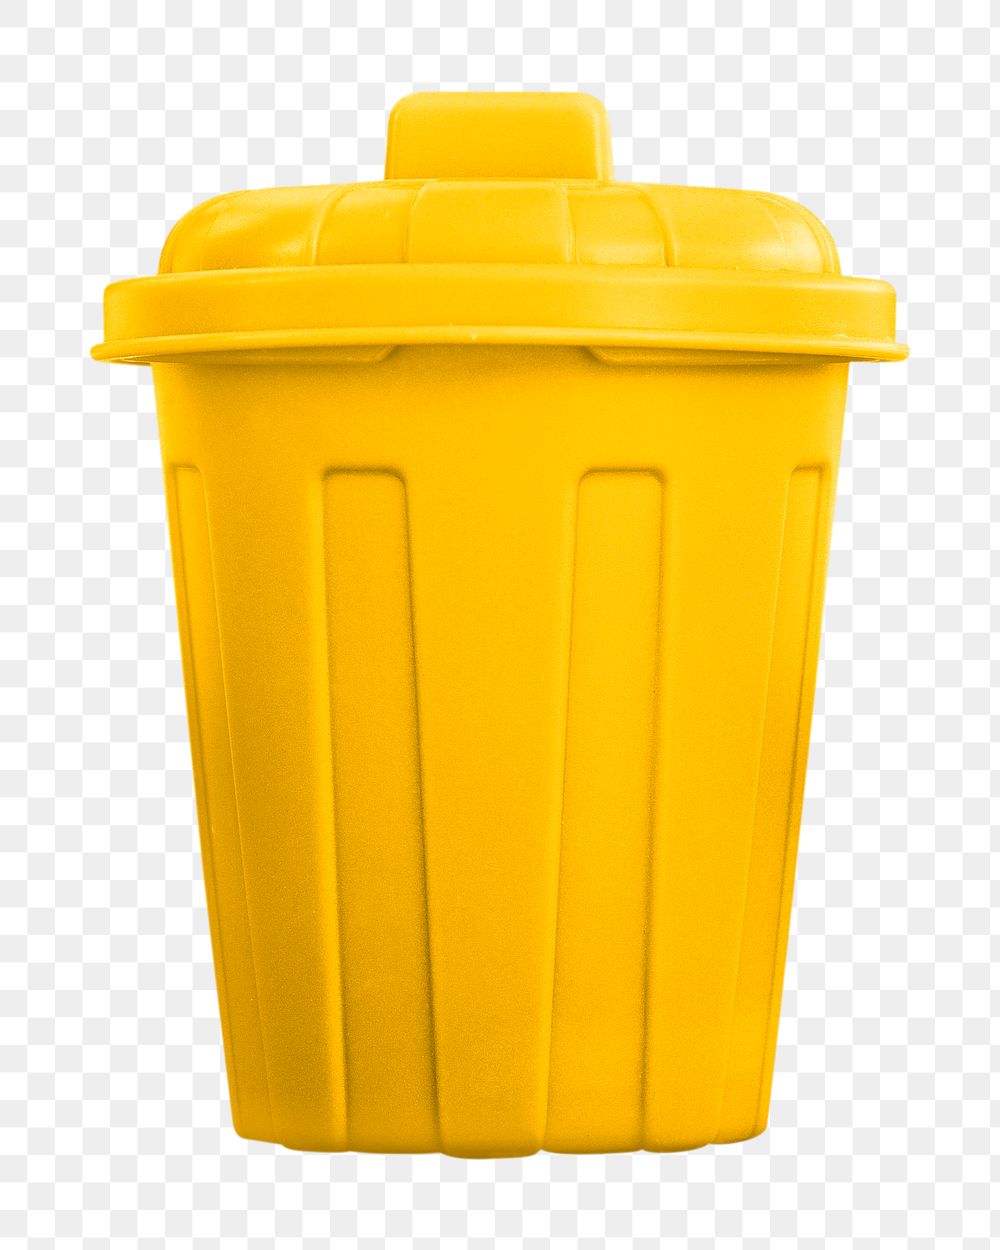 Png yellow garbage bin, isolated collage element, transparent background